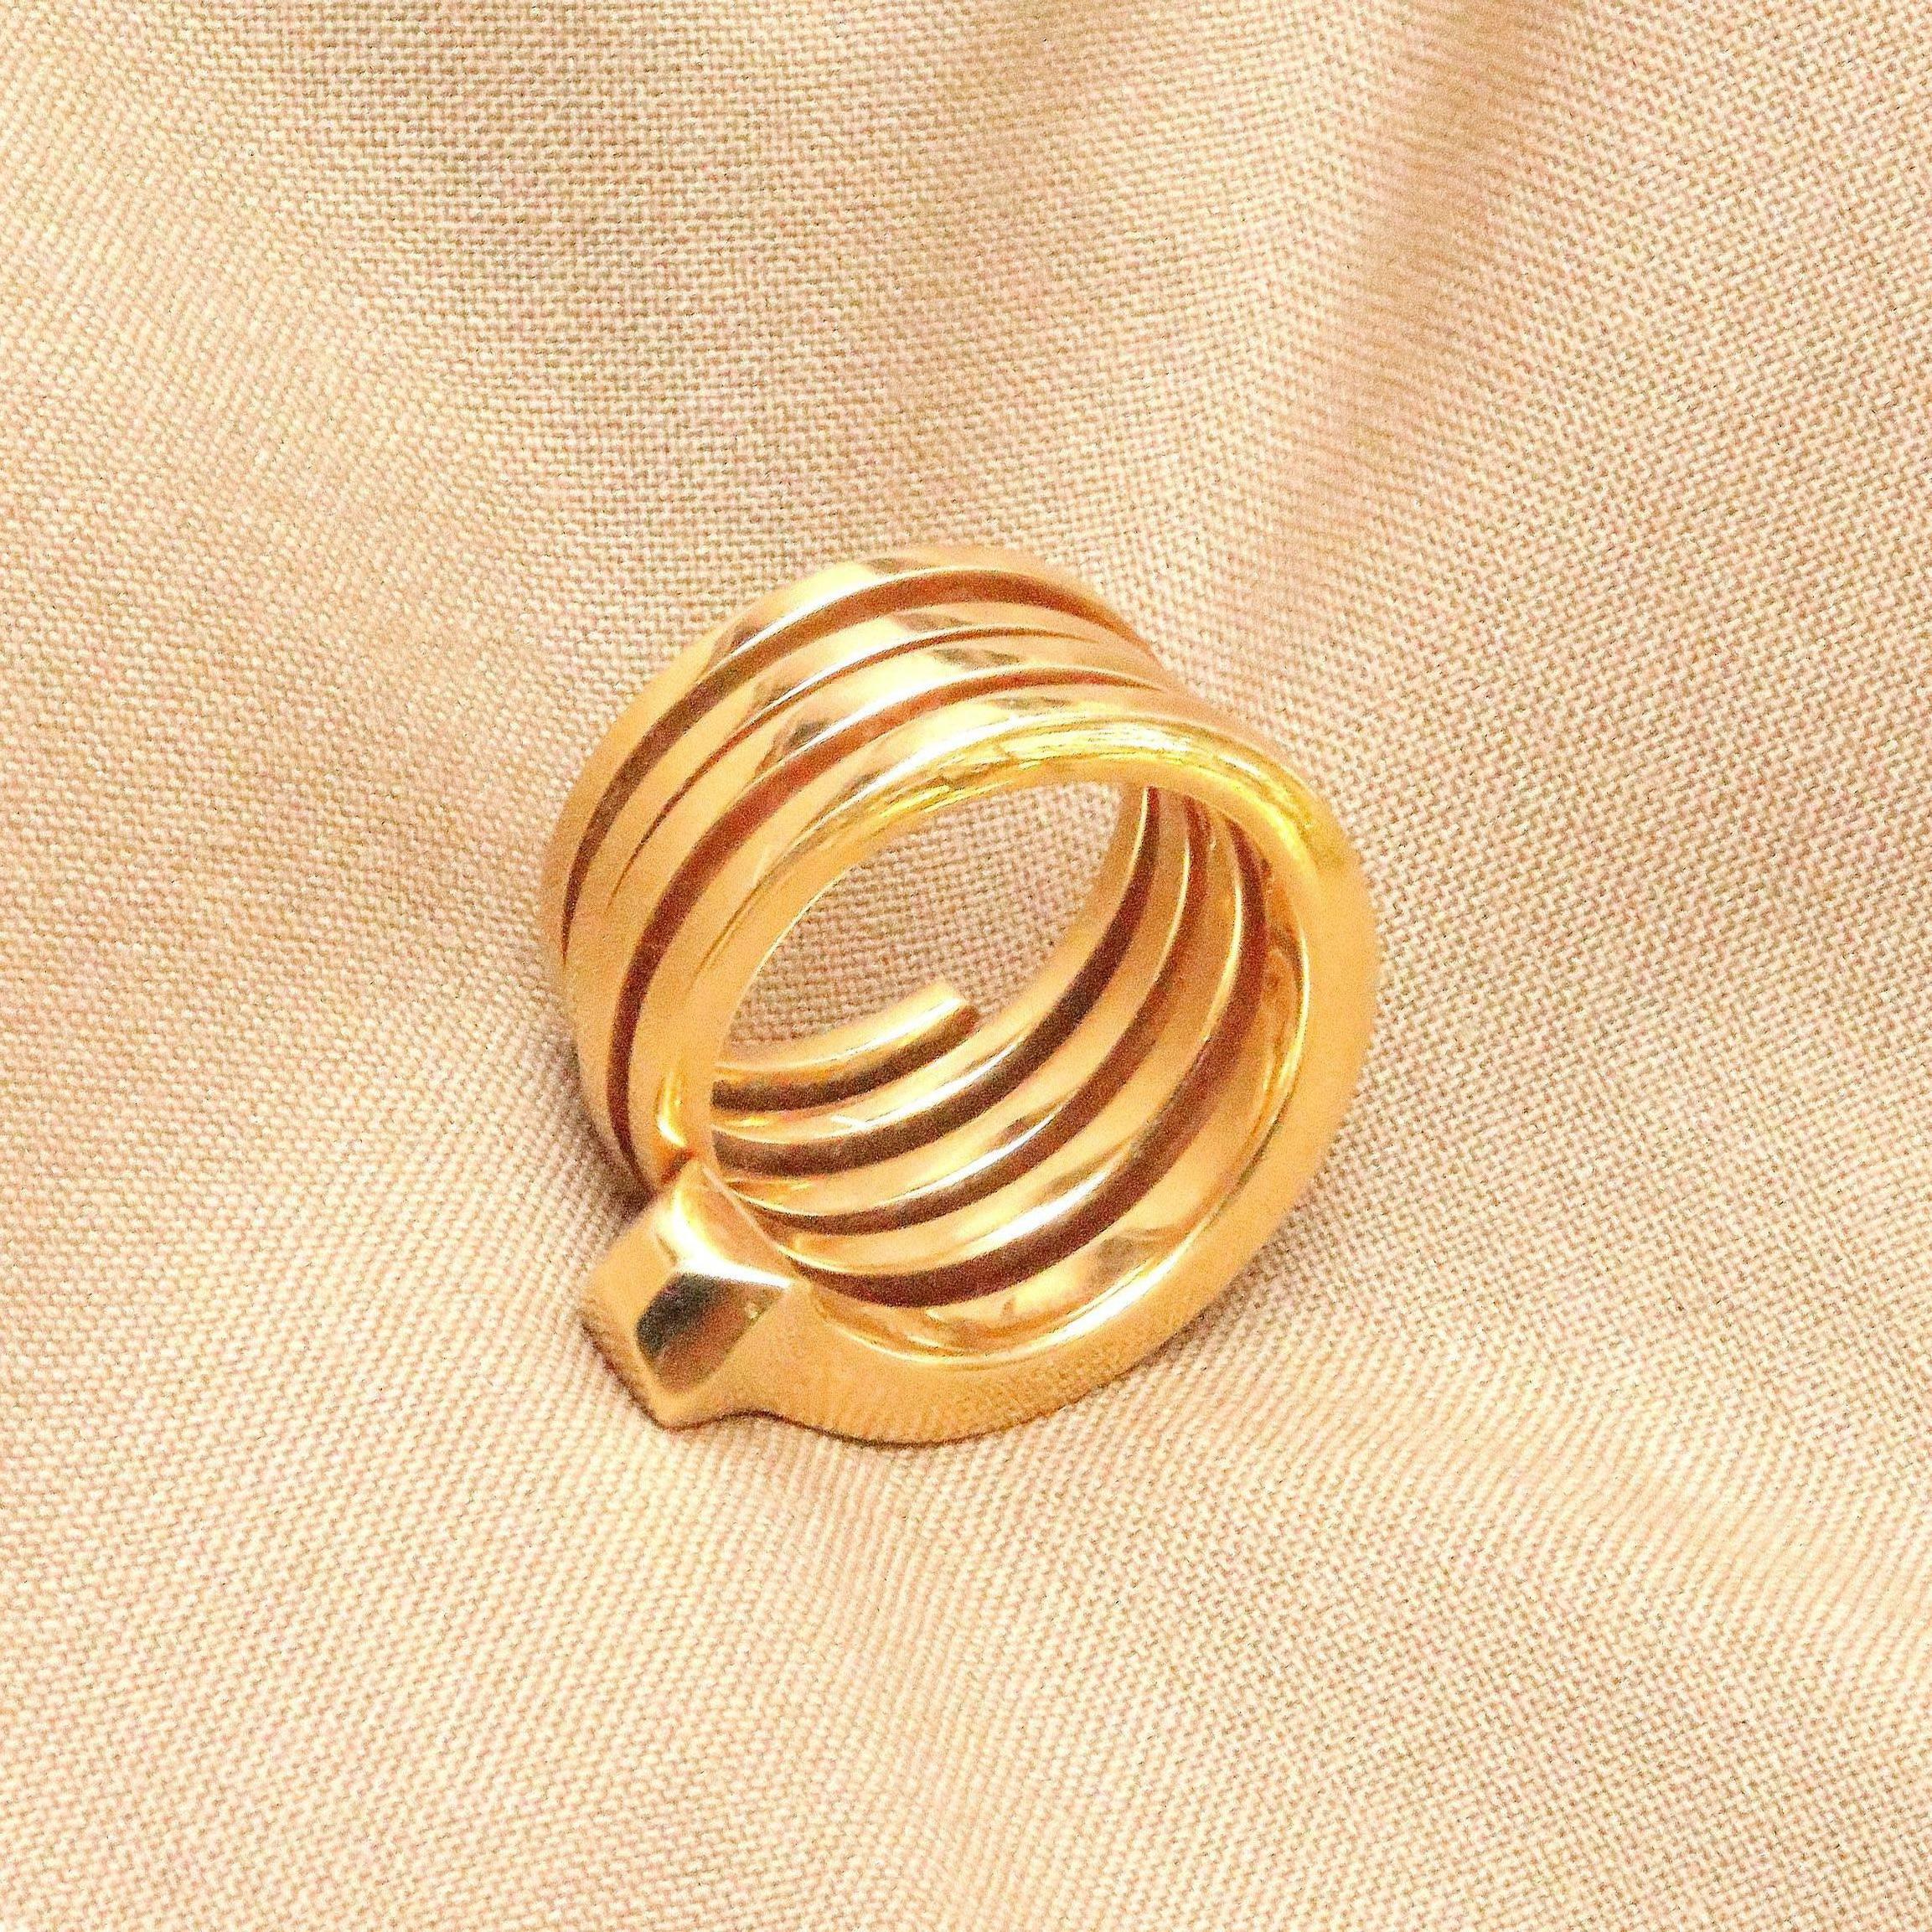 Gucci's appealing and creative version of the coiled nail ring. Created in 18k glistening gold. 

Ring size 5.
